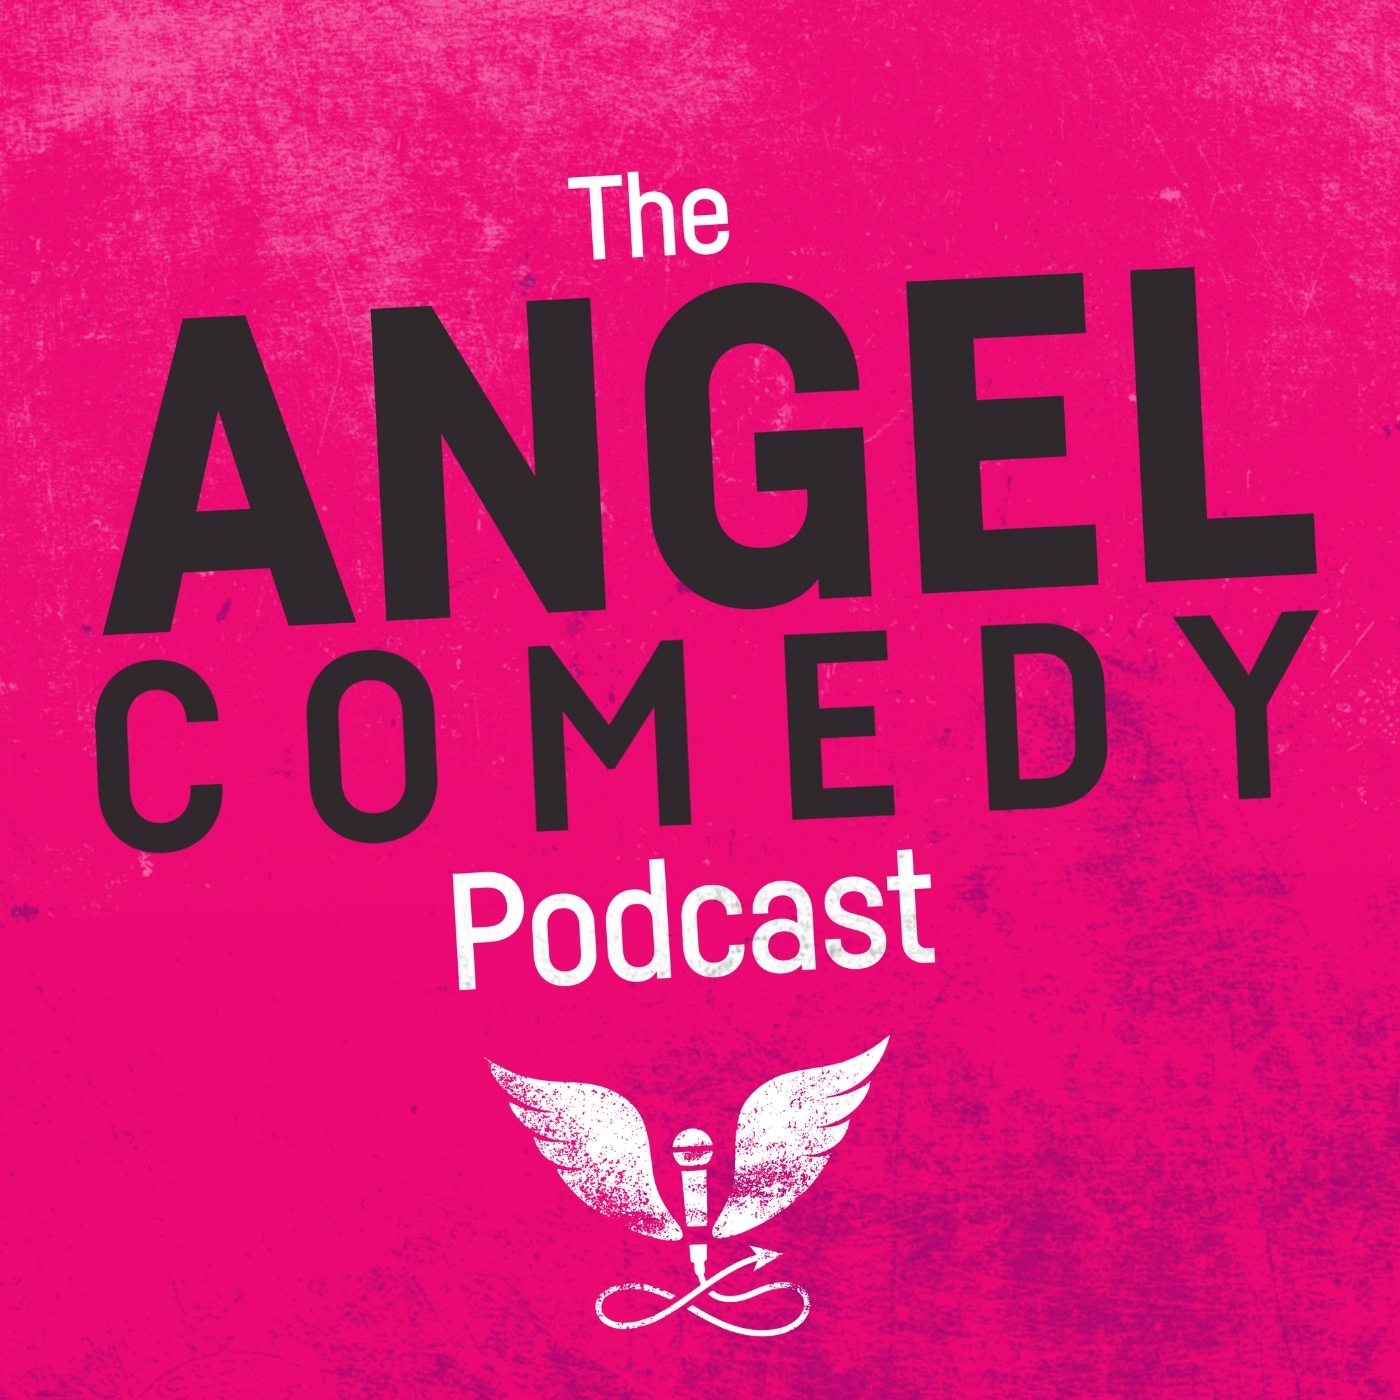 Podcast: The Angel Comedy Podcast with Sunil Patel: Part 1 - Angel Comedy